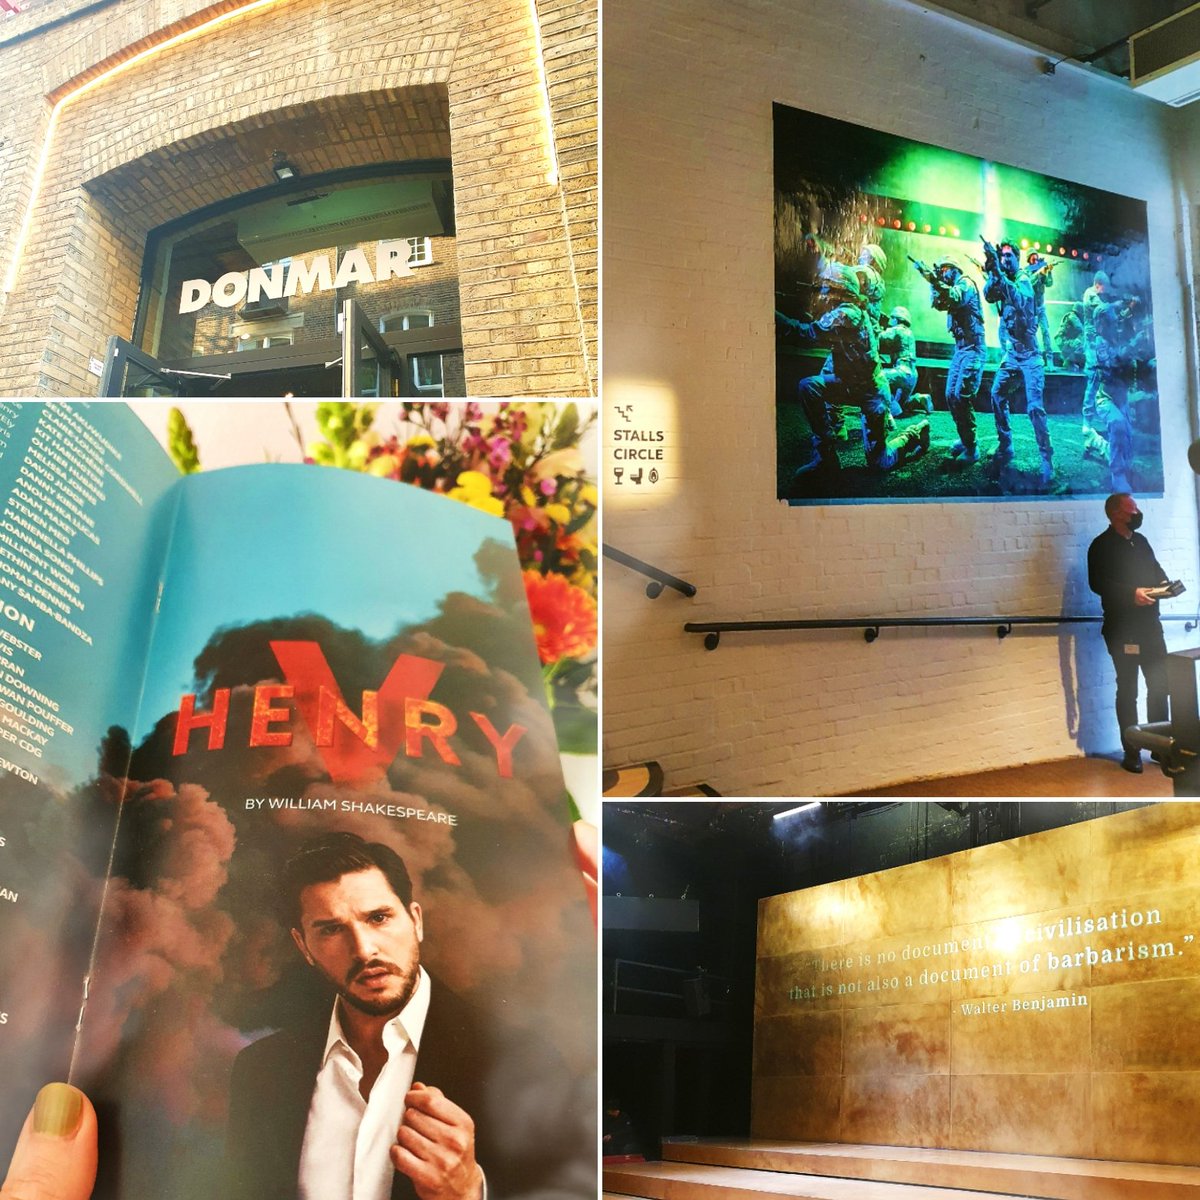 #FirstRowTix #CozyAtmosphere 
❝I believe I can fly, I believe I can touch the stage.❞ At the @DonmarWarehouse in London for #HenryV last Saturday❣️🎭🪖 A festival of action, drama, entertainment + finest stage art.🤘 The play's standout performance came from #KitHarington❣️🤴